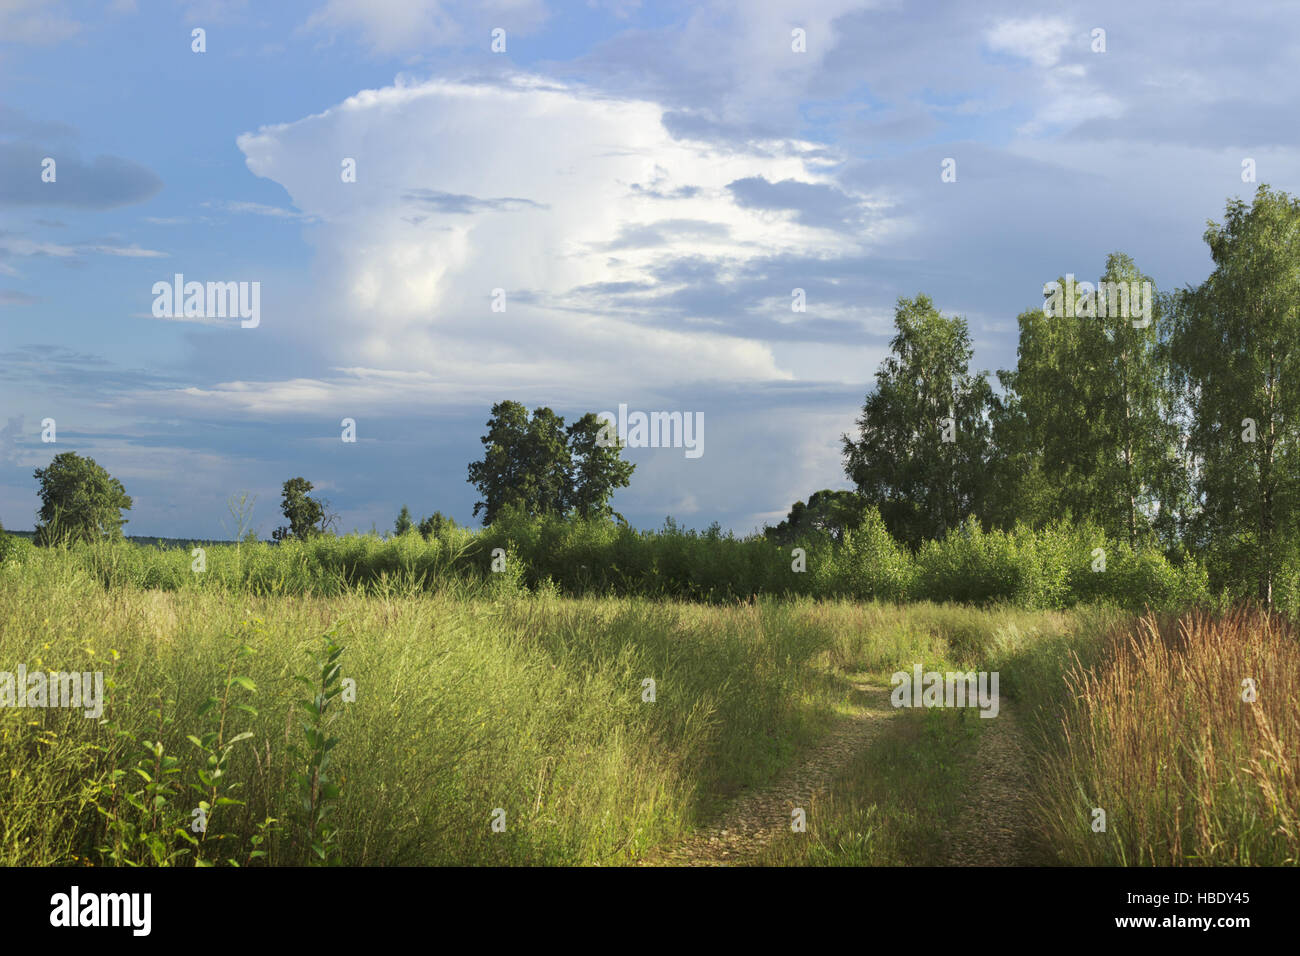 Offensive thunderstorm in the summer Stock Photo